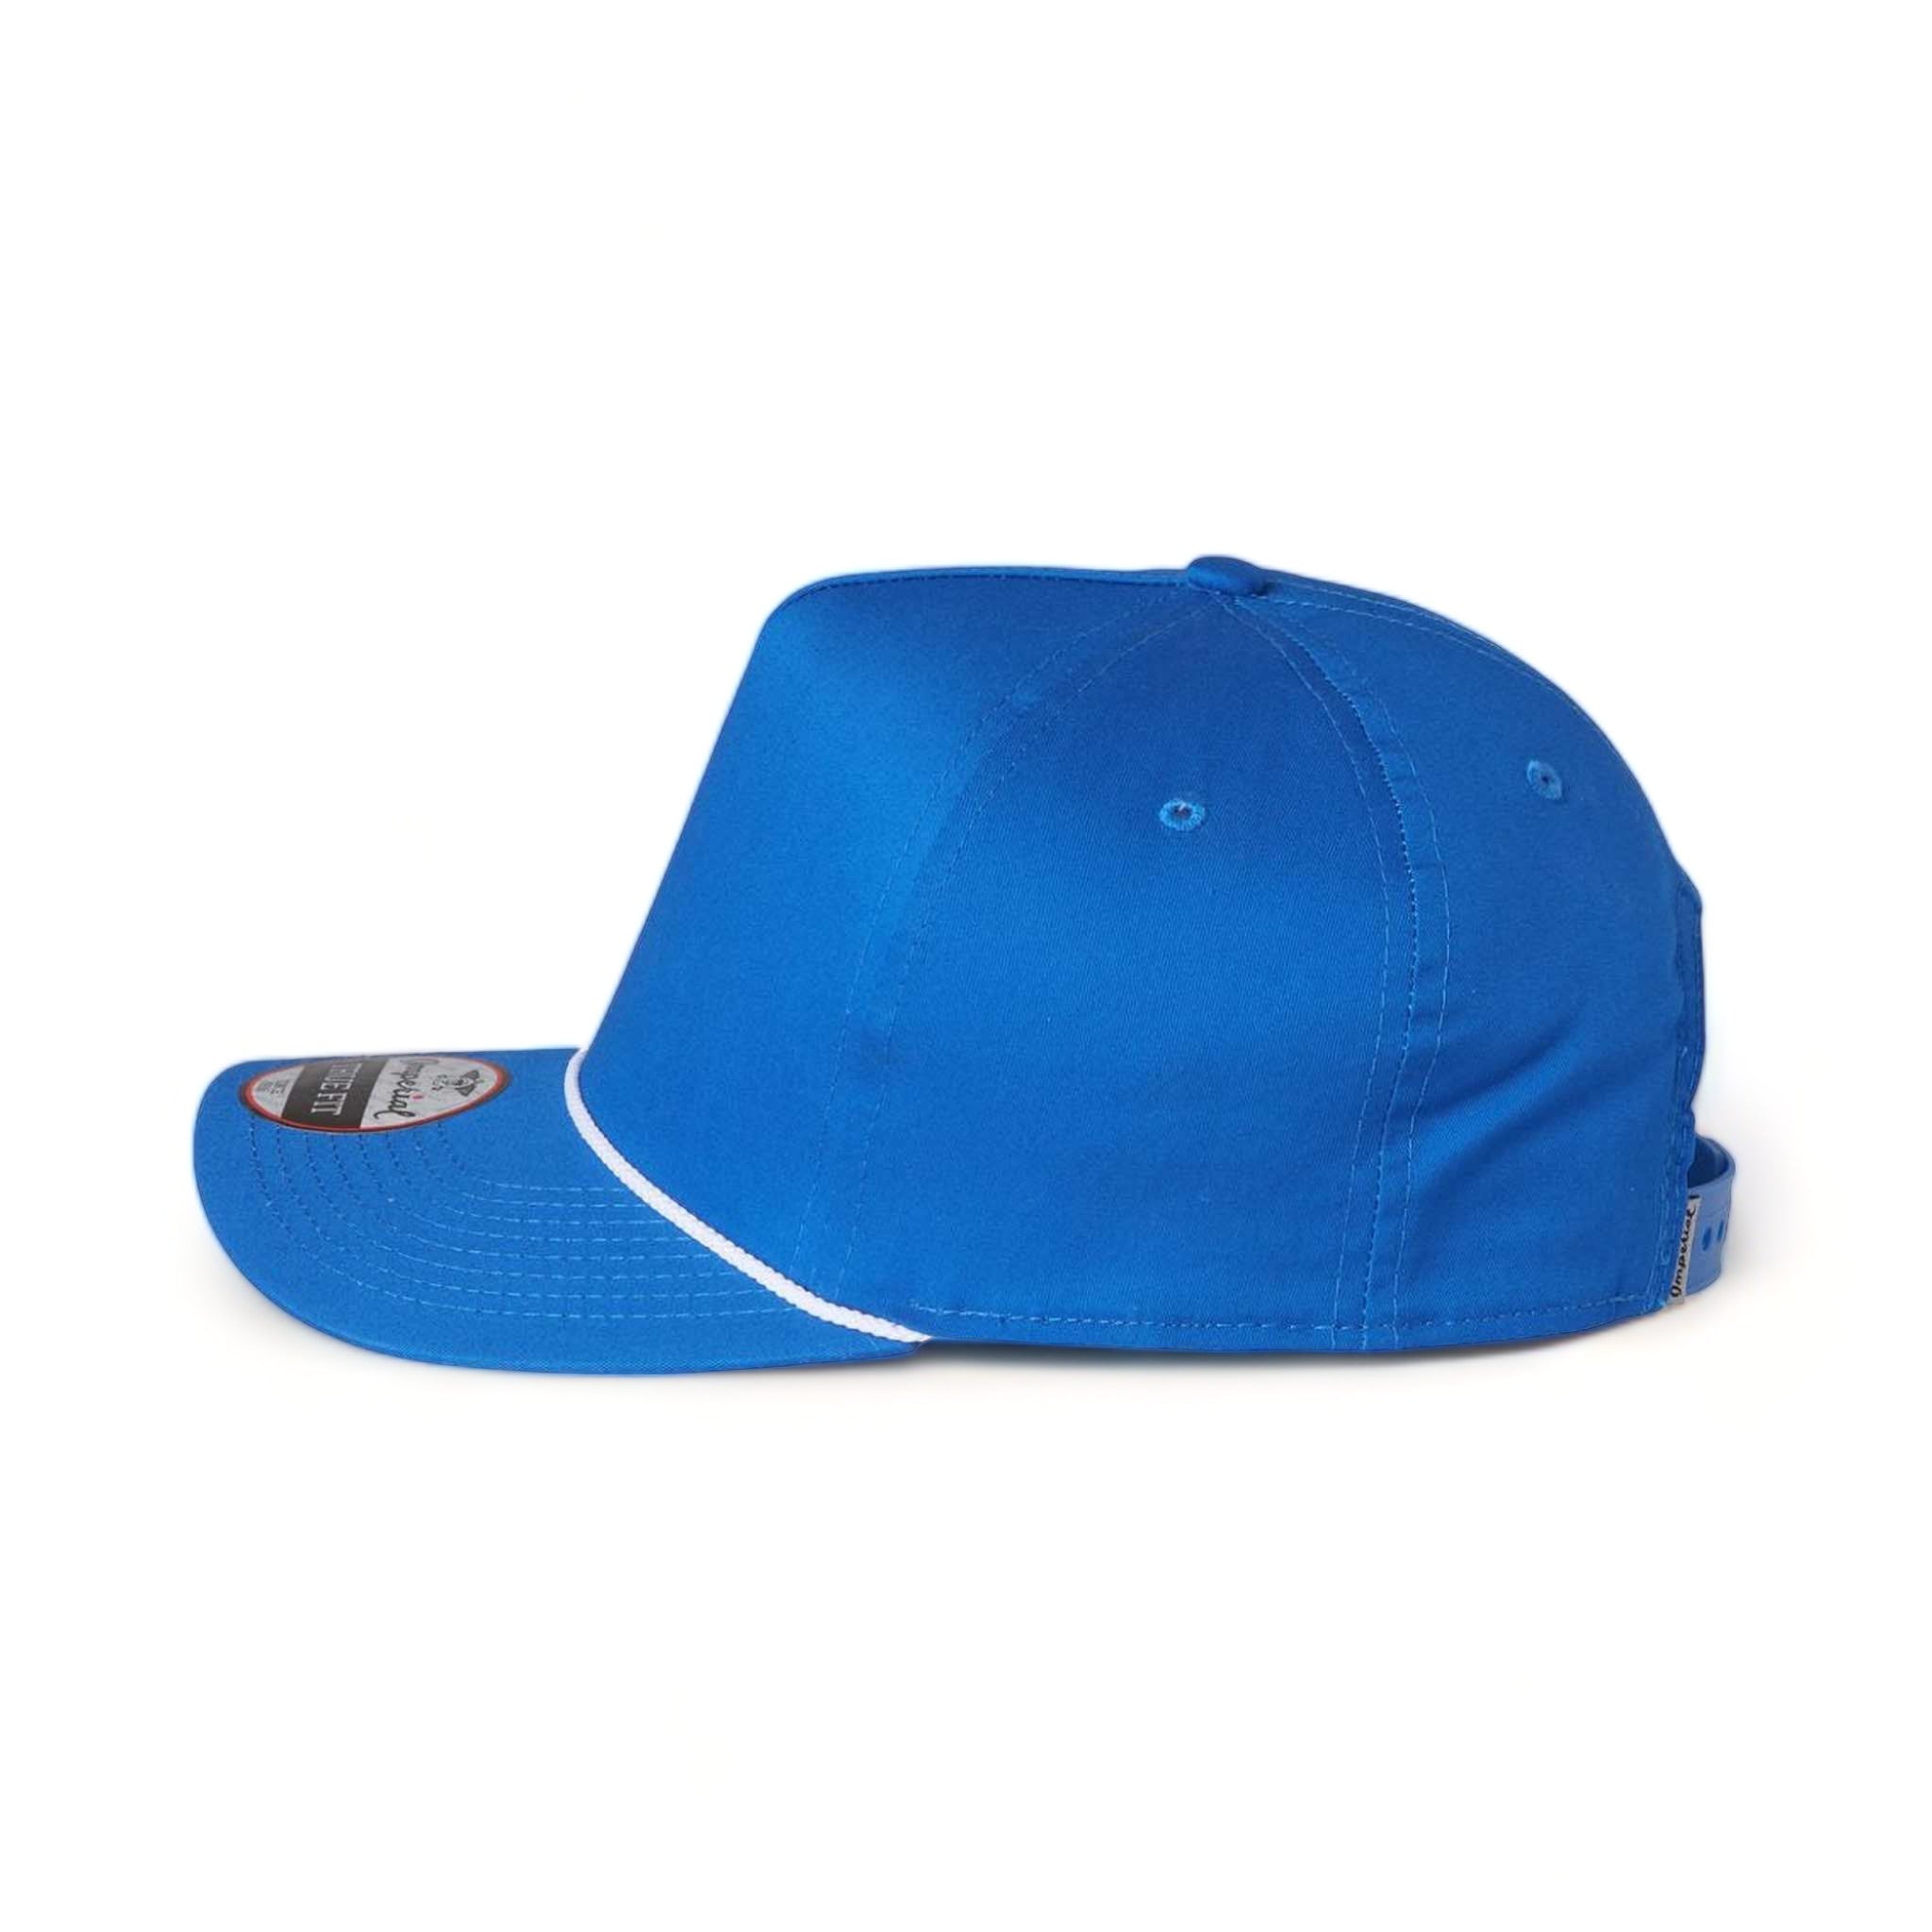 Side view of Imperial 5056 custom hat in royal and white